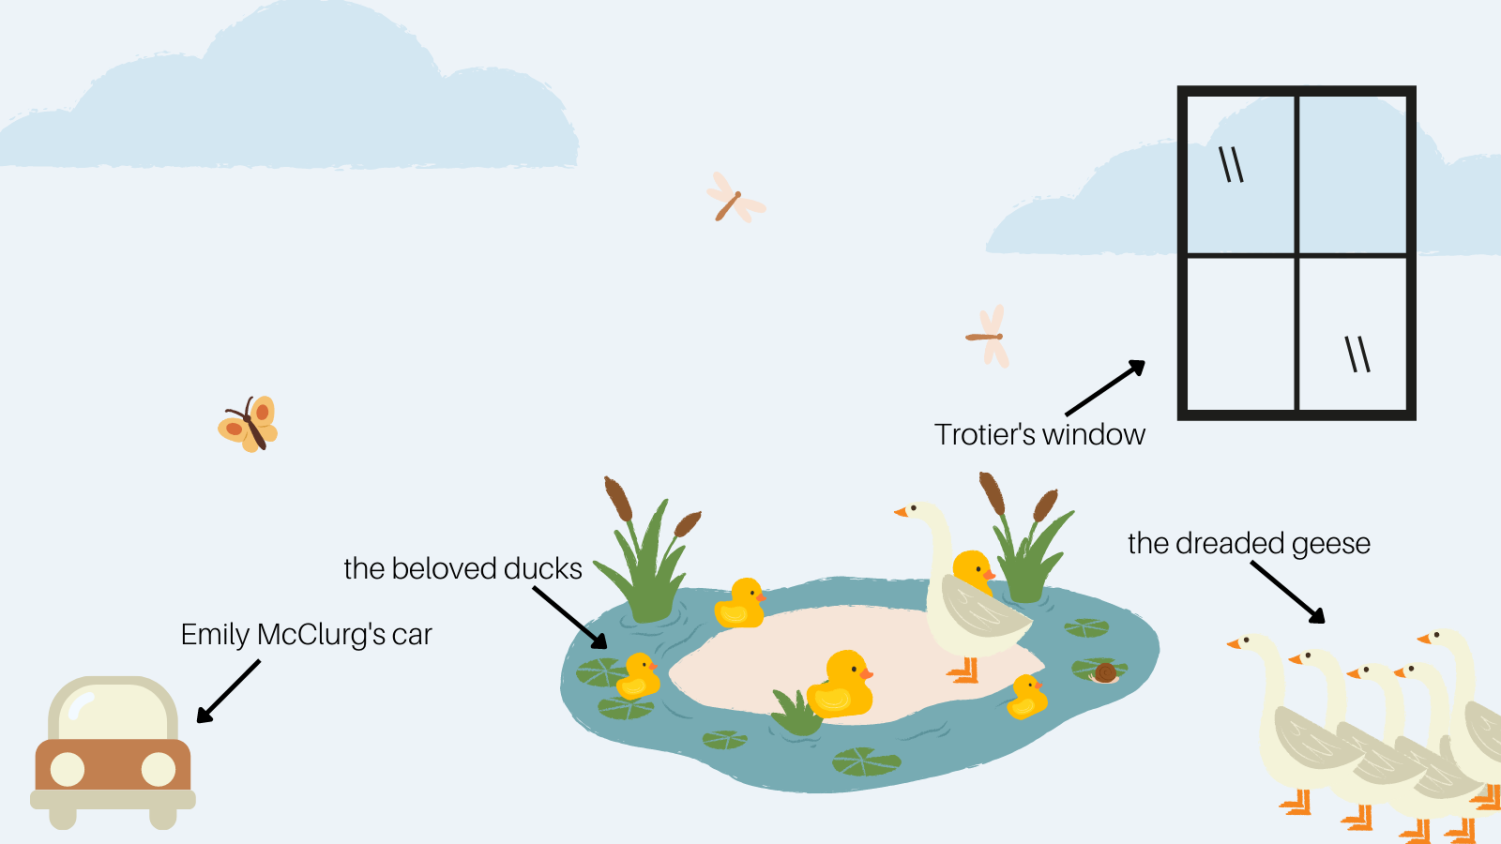 draw a pond ecosystem and write about an ecosy system​ - Brainly.in